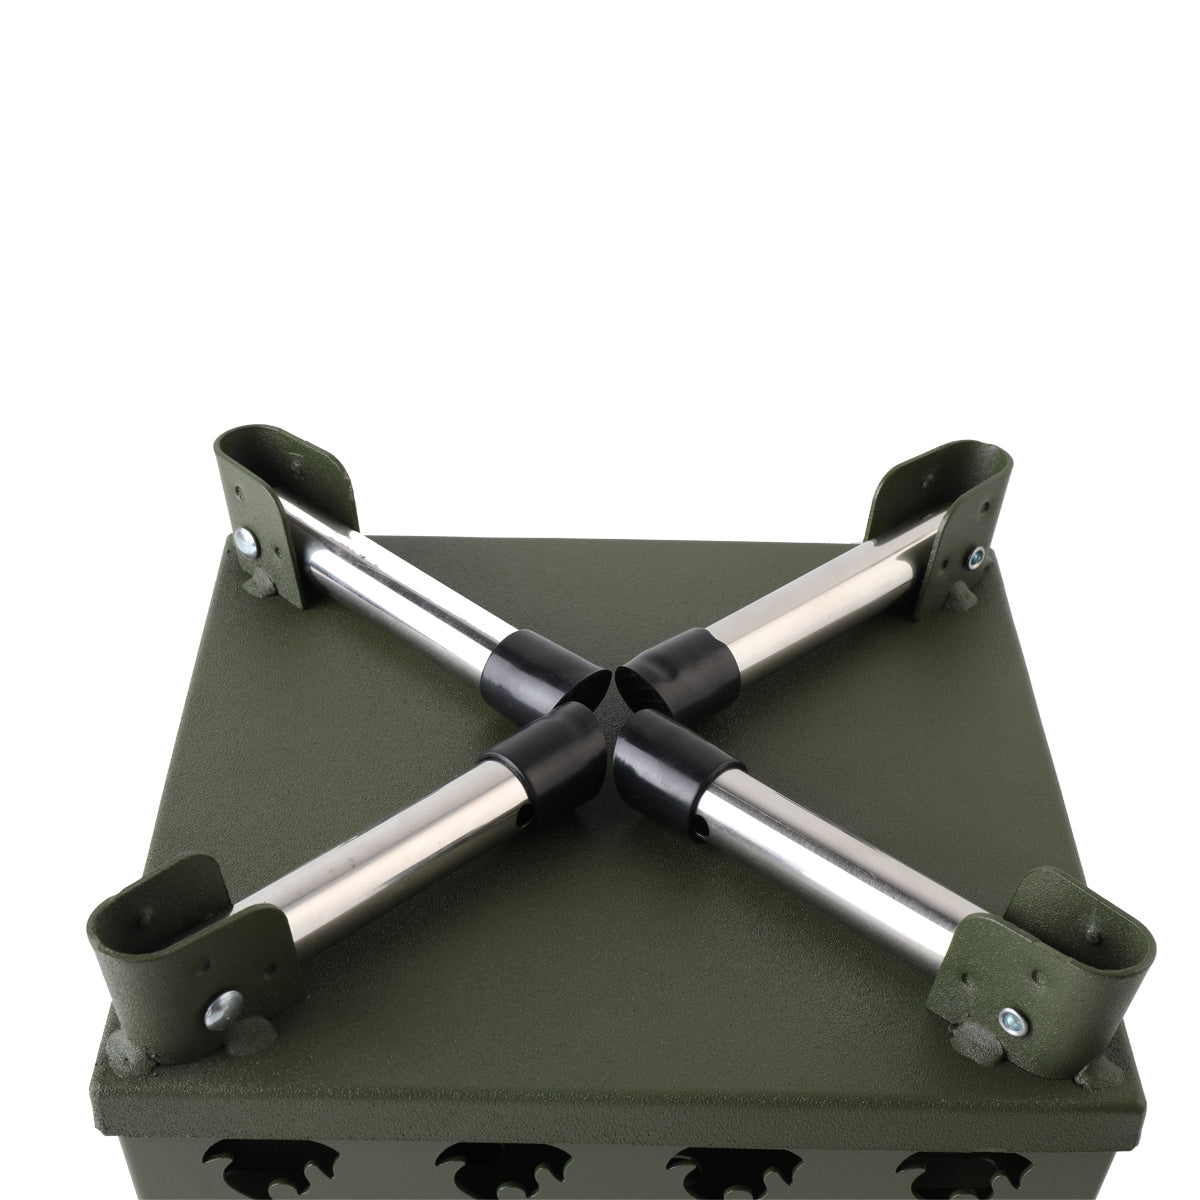 ECUTEE 8.7 inch Wood Burning Stove Outdoor Portable Camping Stove for Tent For Camping, Ice-Fishing, Cookout, Travelling(Green)